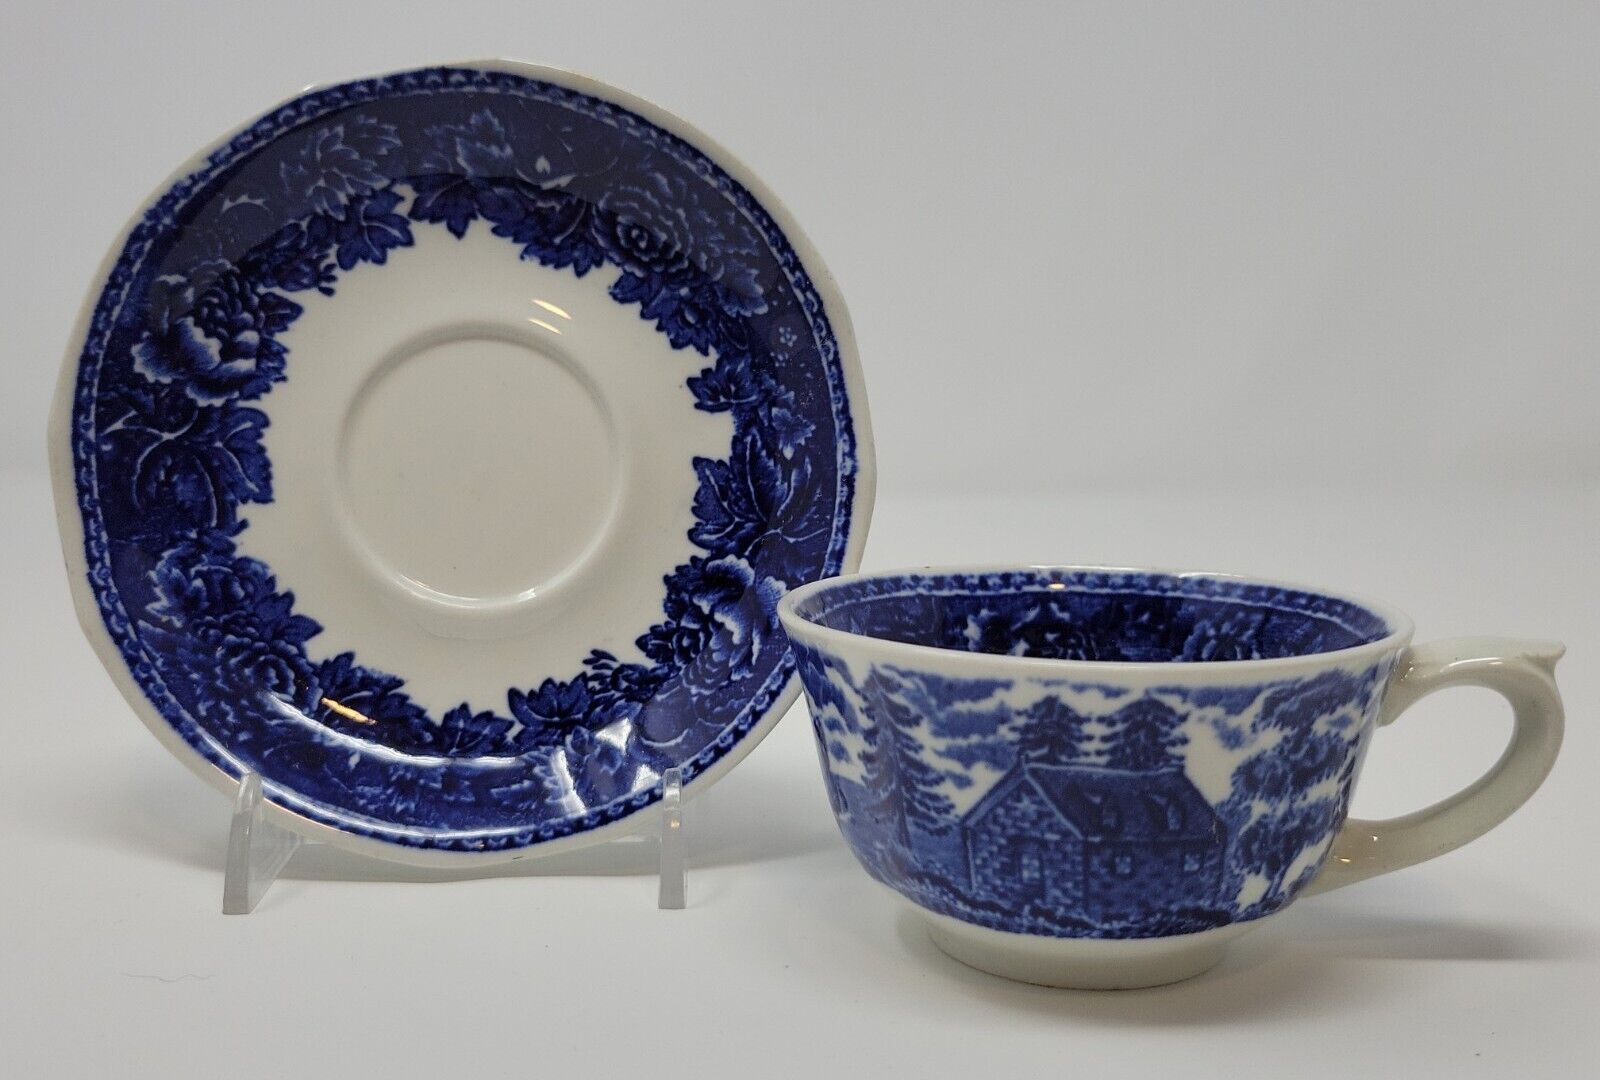 Read more about the article Lovely Vintage Arabia Finland Small Teacup and Saucer Blue and White China